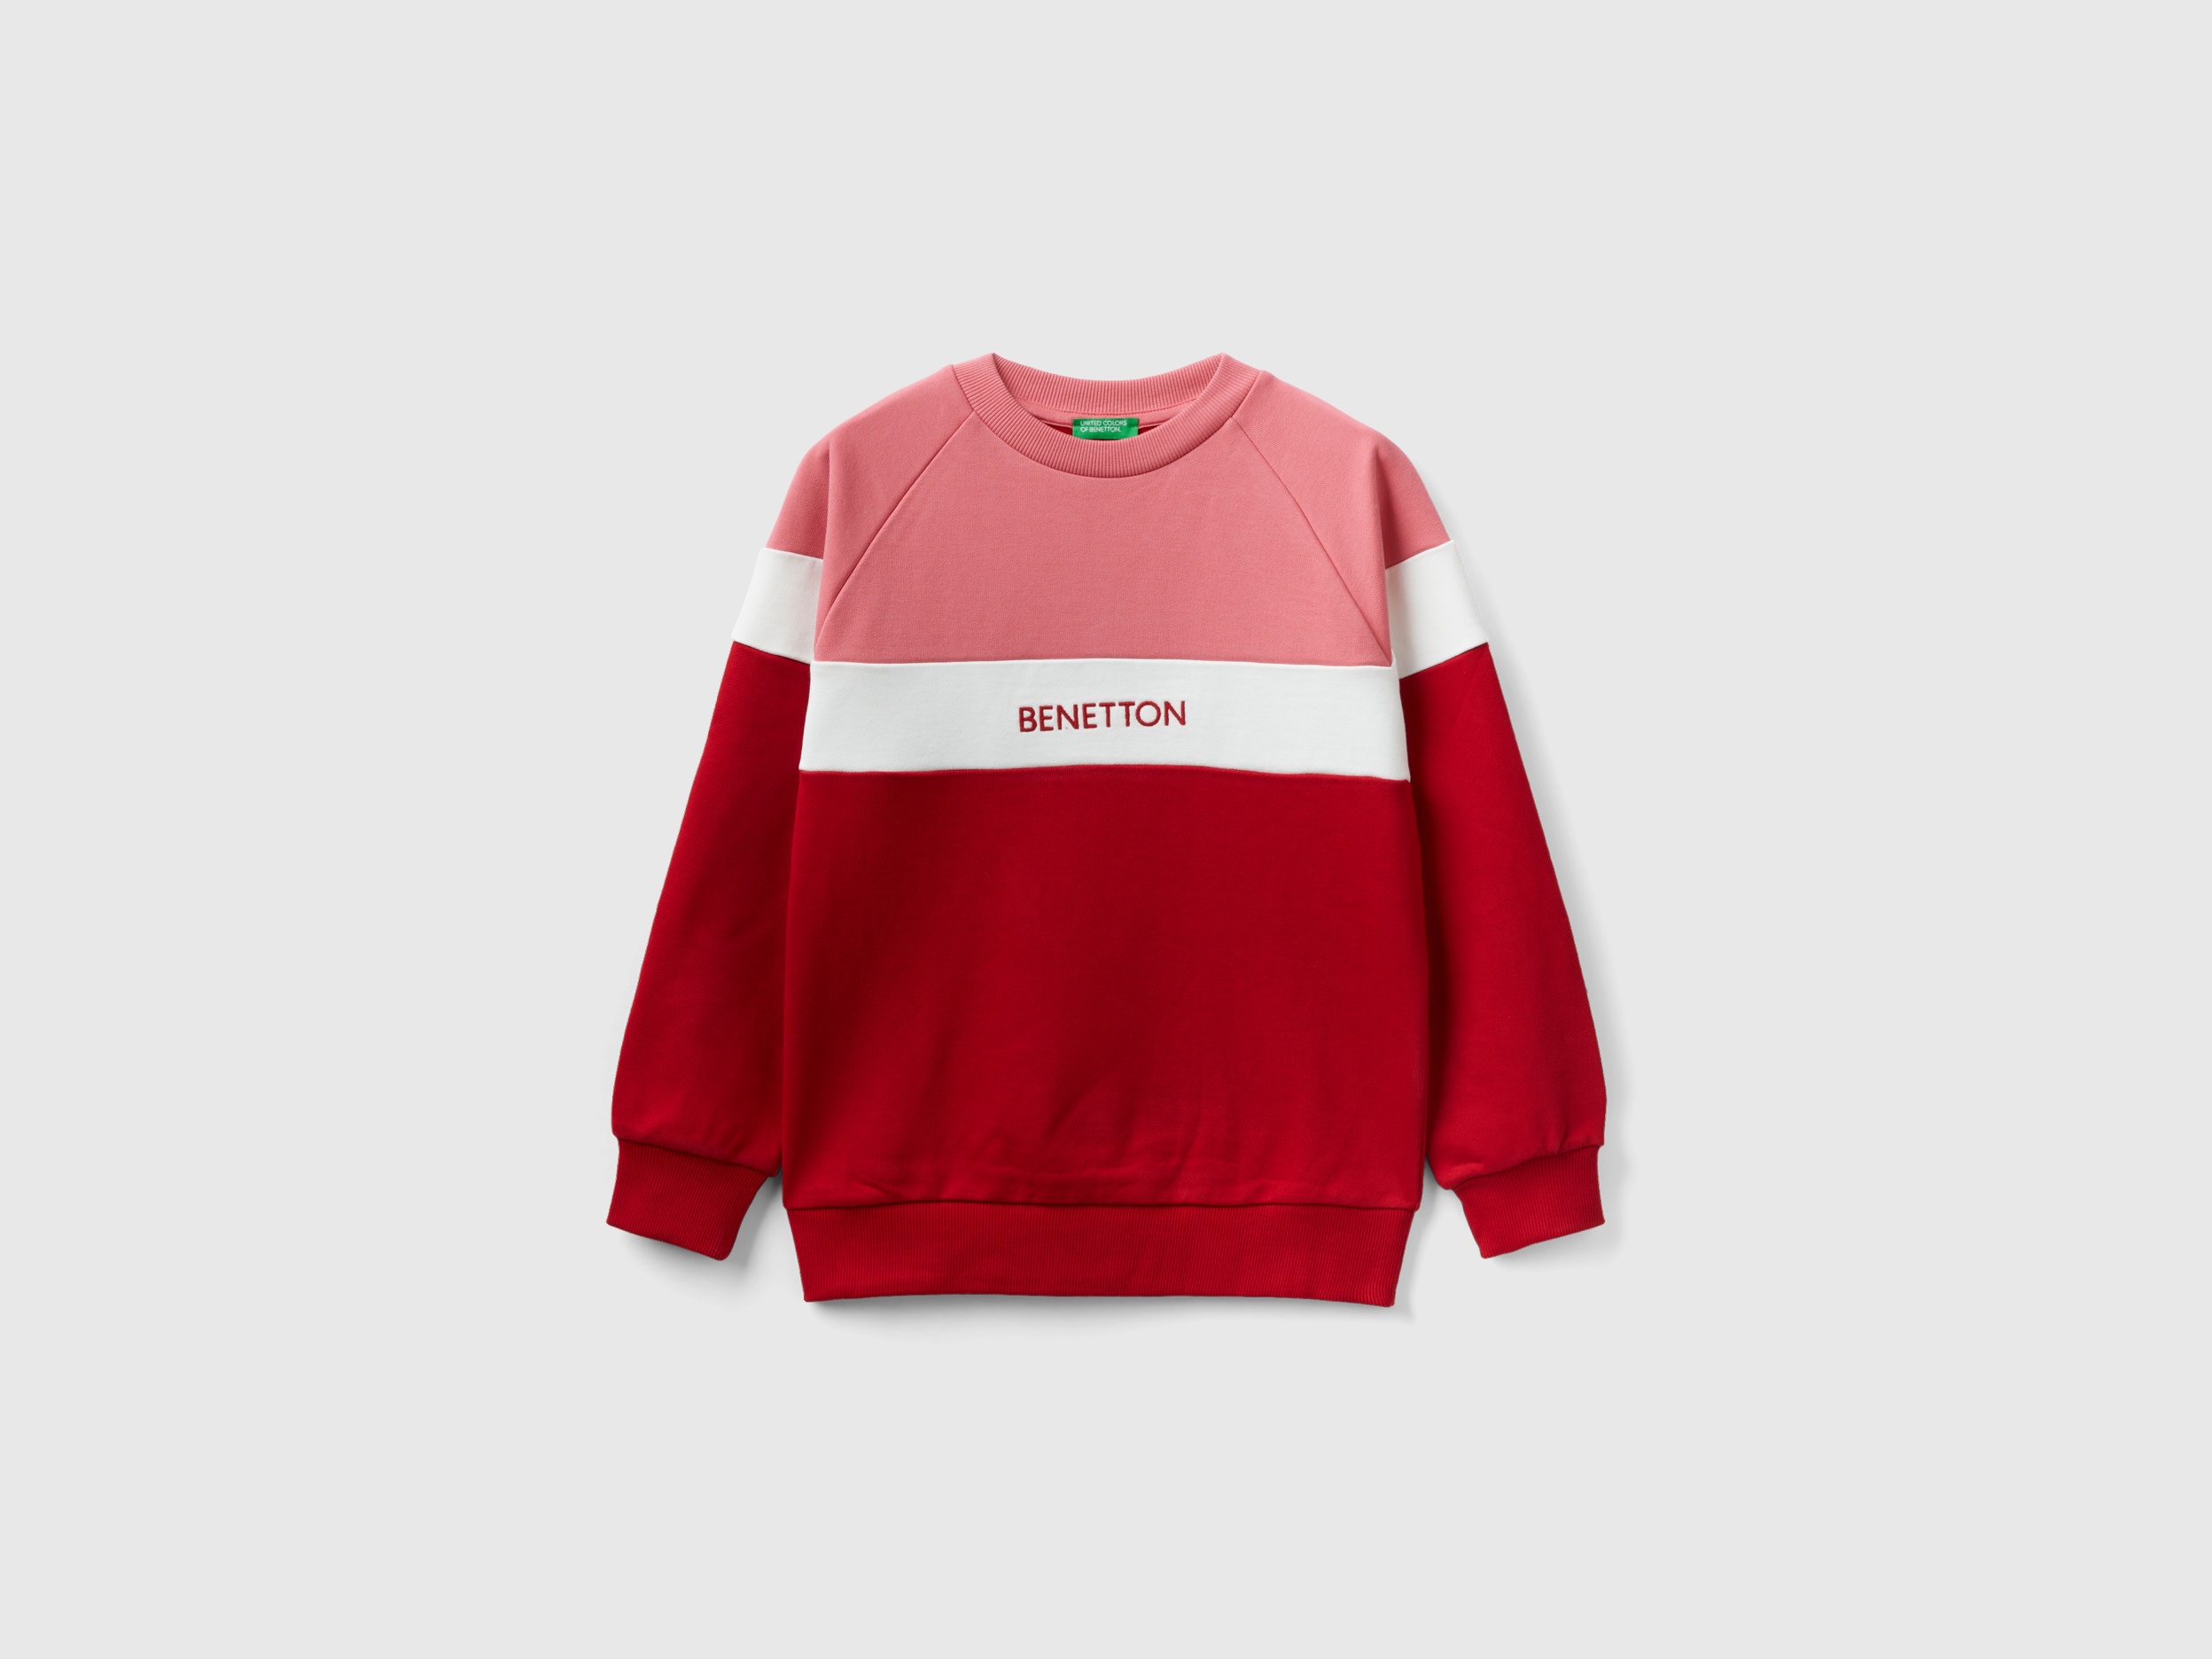 Benetton, Pink And Red Sweatshirt With Embroidered Logo, size M, Brick Red, Kids